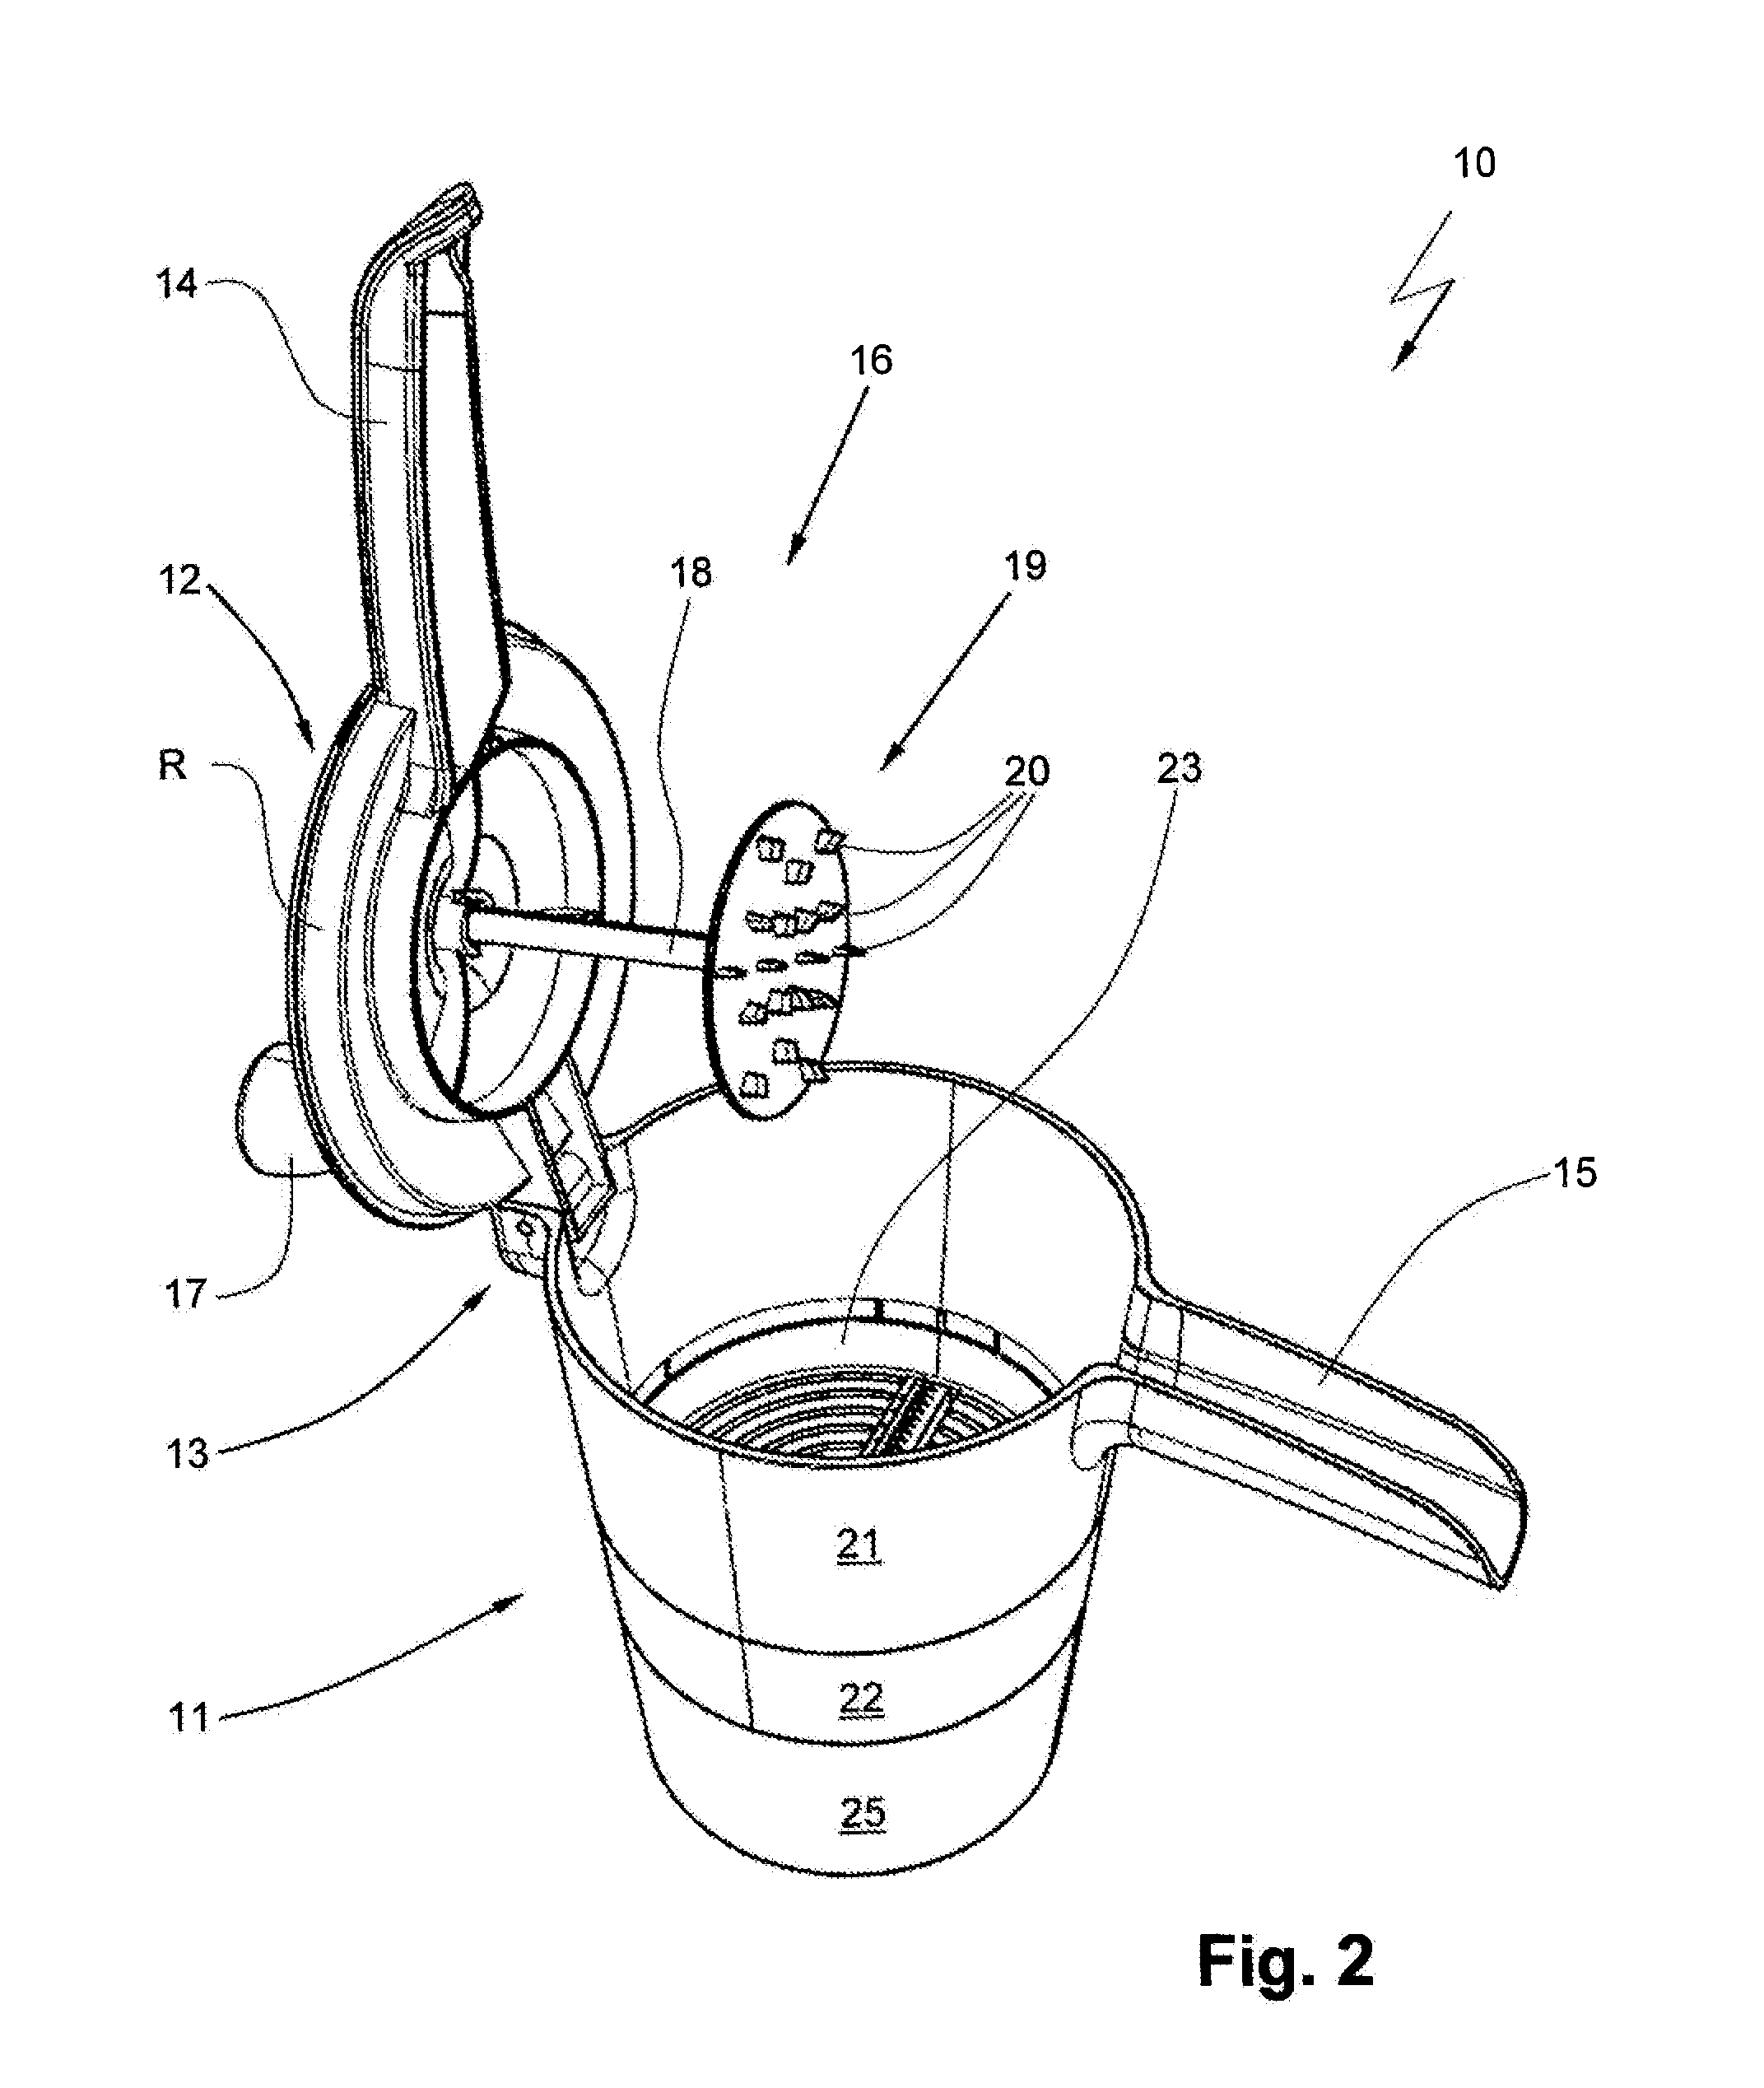 Device for Spiral Cutting Fruit and Hard Vegetables